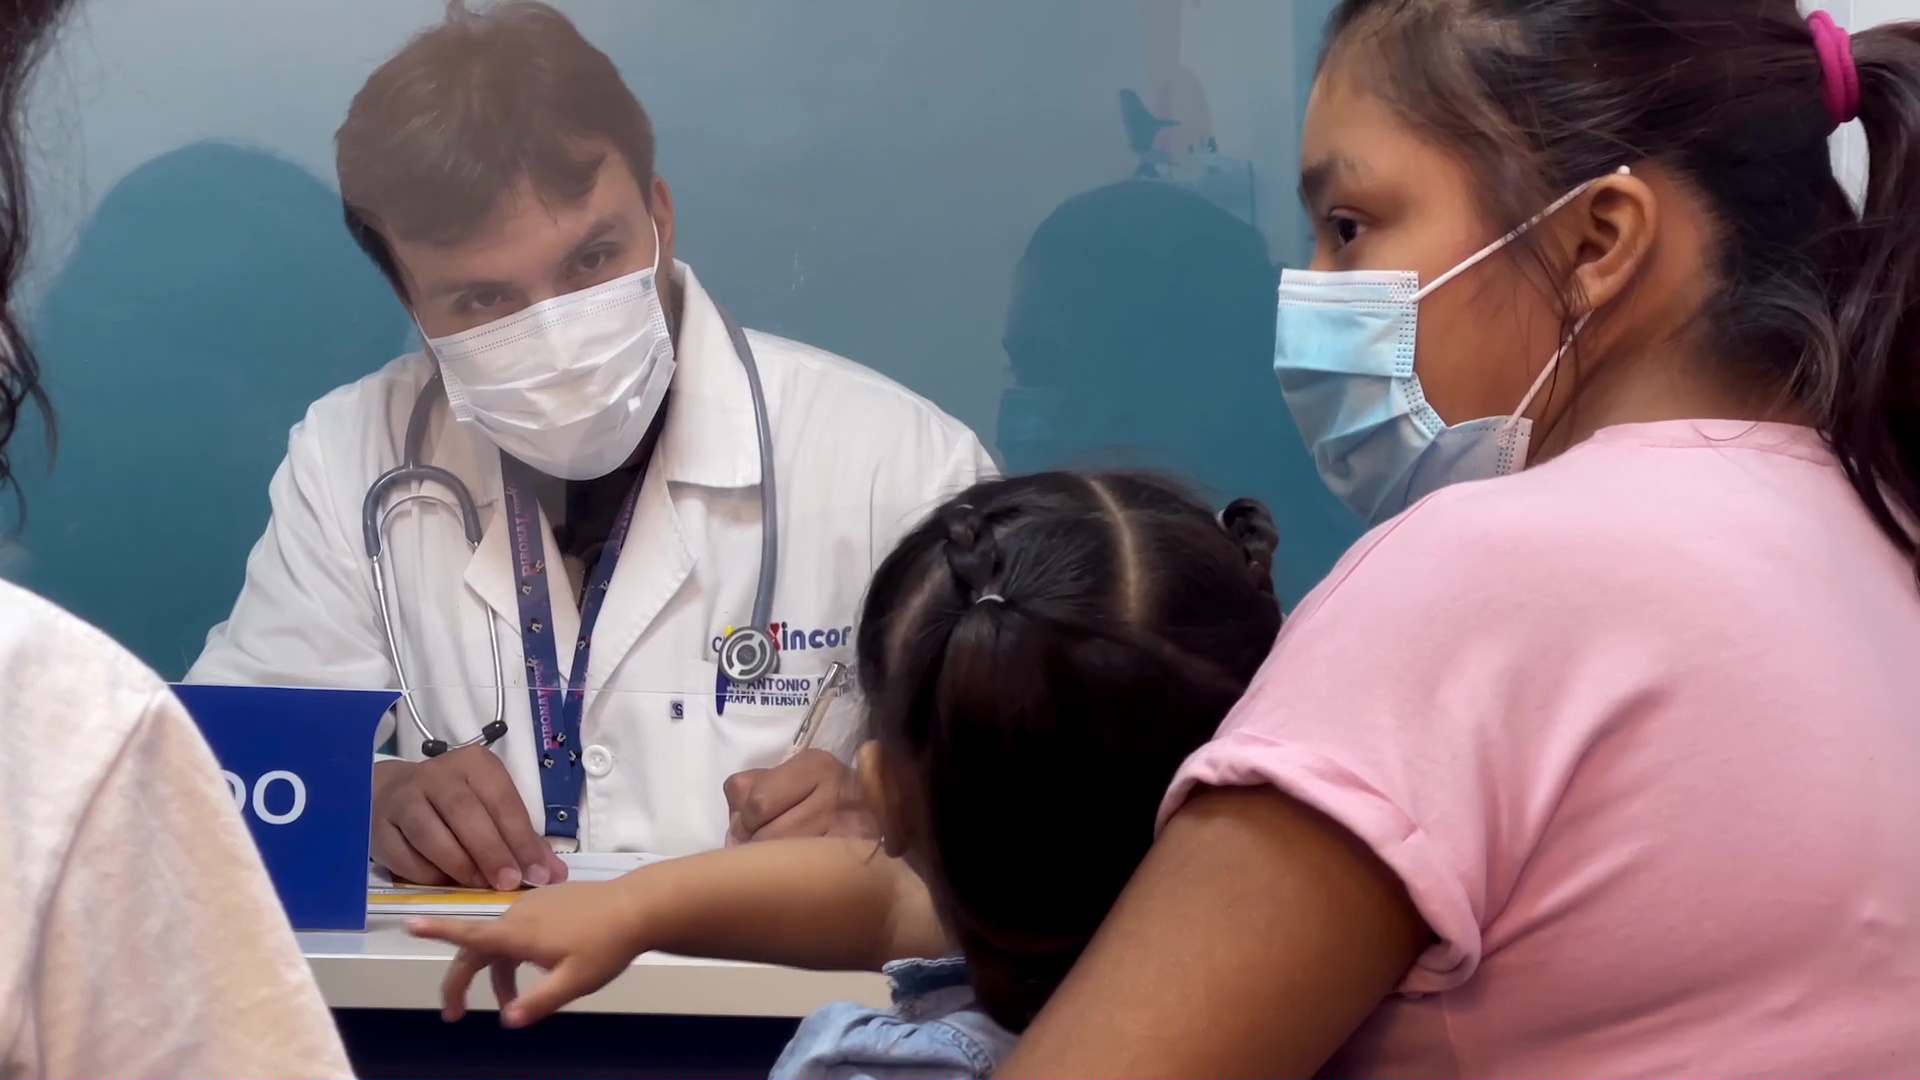 The Children's Heart Project organizes heart surgeries for children and girls in Bolivia and countries where access to them is difficult